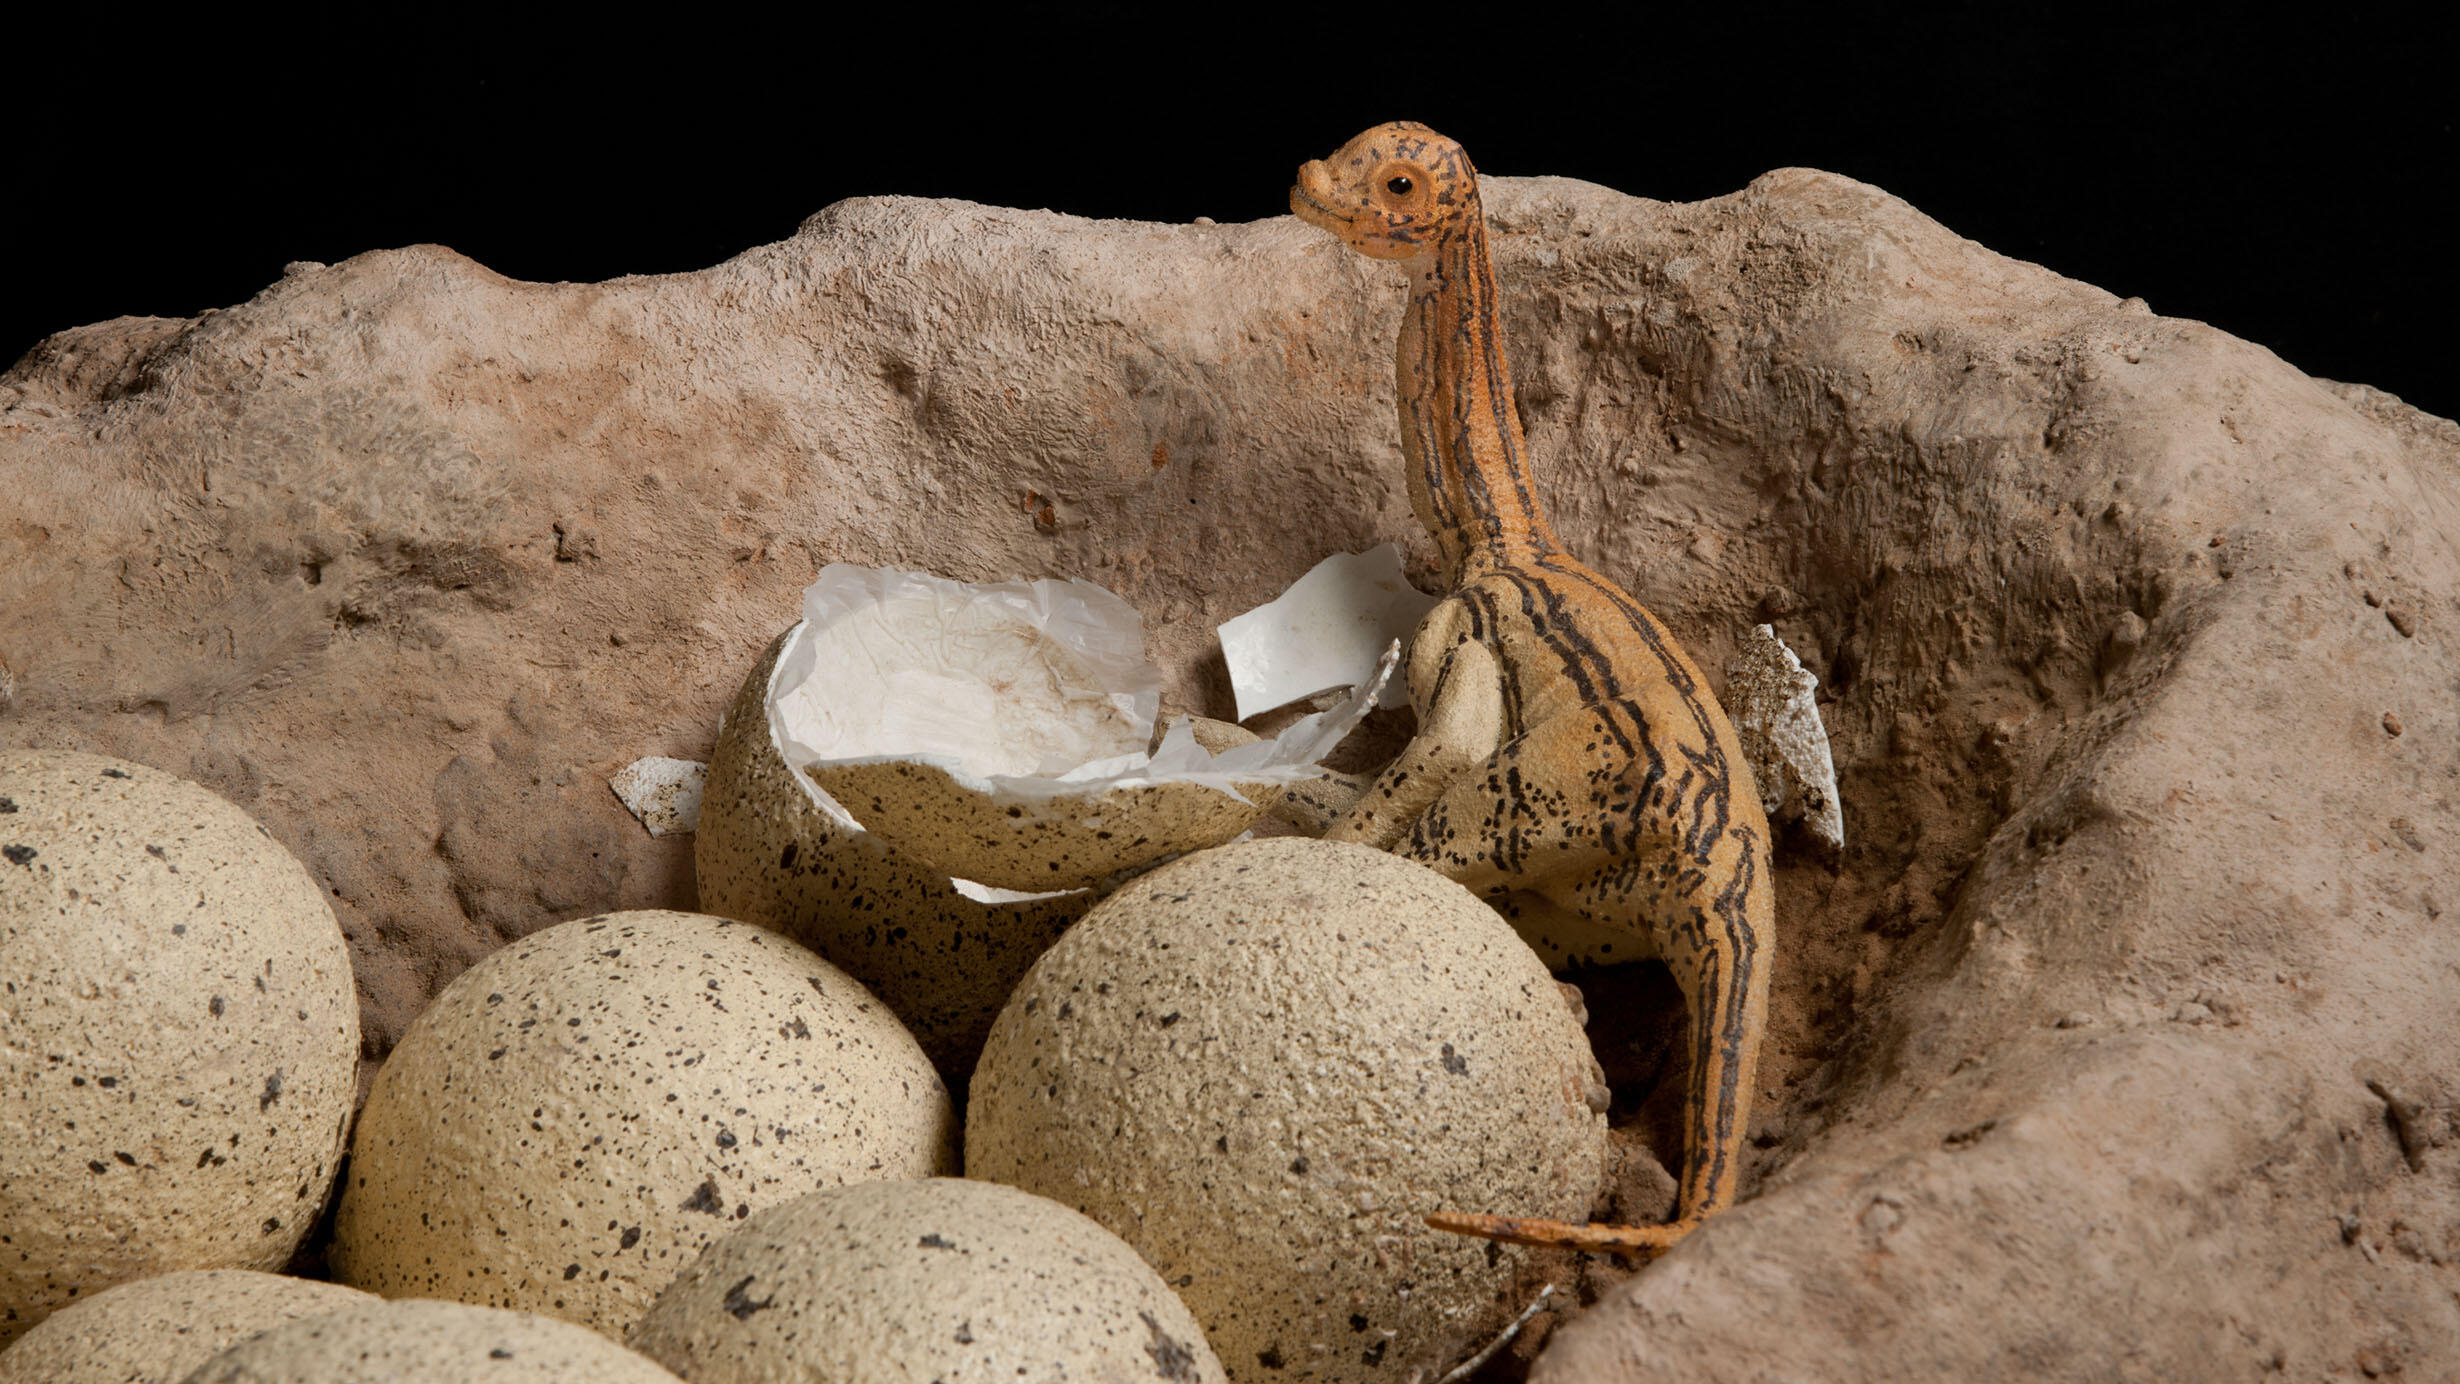 Dinosaur nest, eggs, and a recently hatched sauropod.